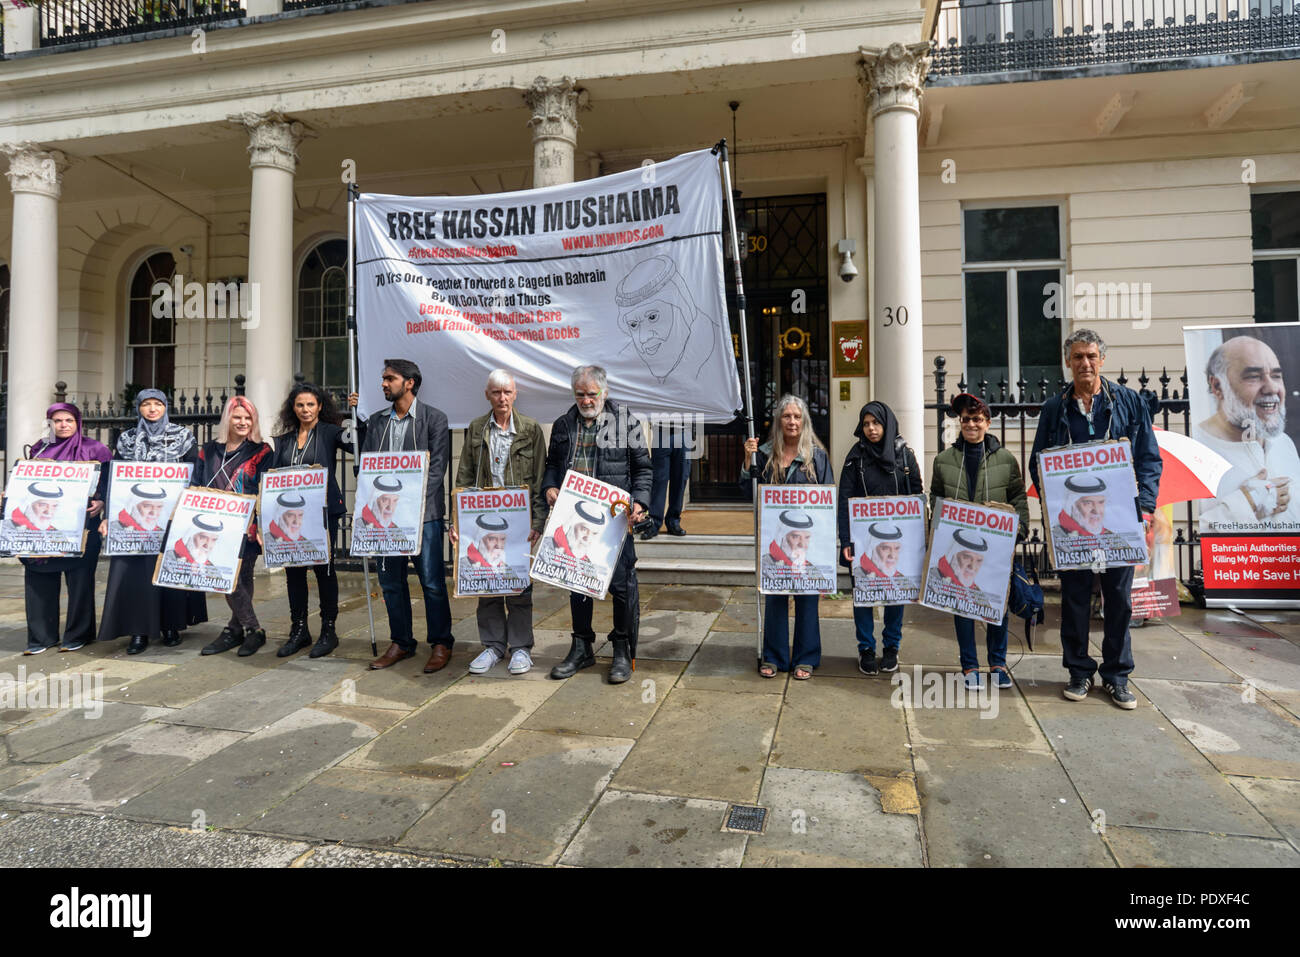 London, UK. 10th August 2018. A vigil by Inminds Islamic human rights organisation outside the Bahrain embassy calls for the immediate release of Hassan Mushaima and all the other 5000 Bahraini prisoners of conscience languishing in the Al-Khalifa regimes jails. Credit: Peter Marshall/Alamy Live News Stock Photo